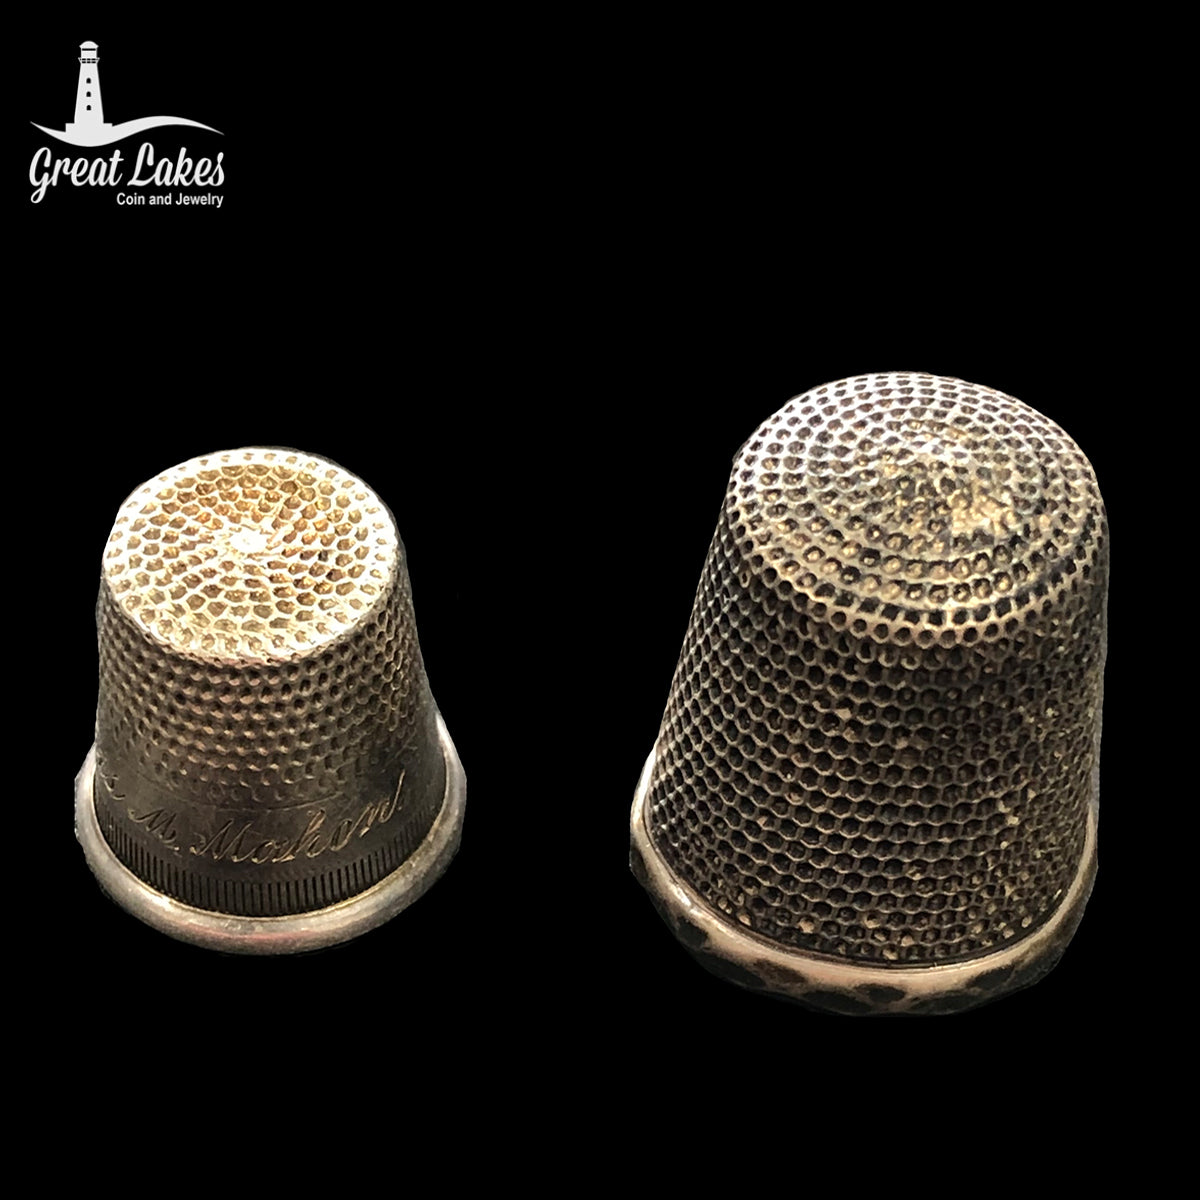 Two Piece Sterling Silver Thimble Set